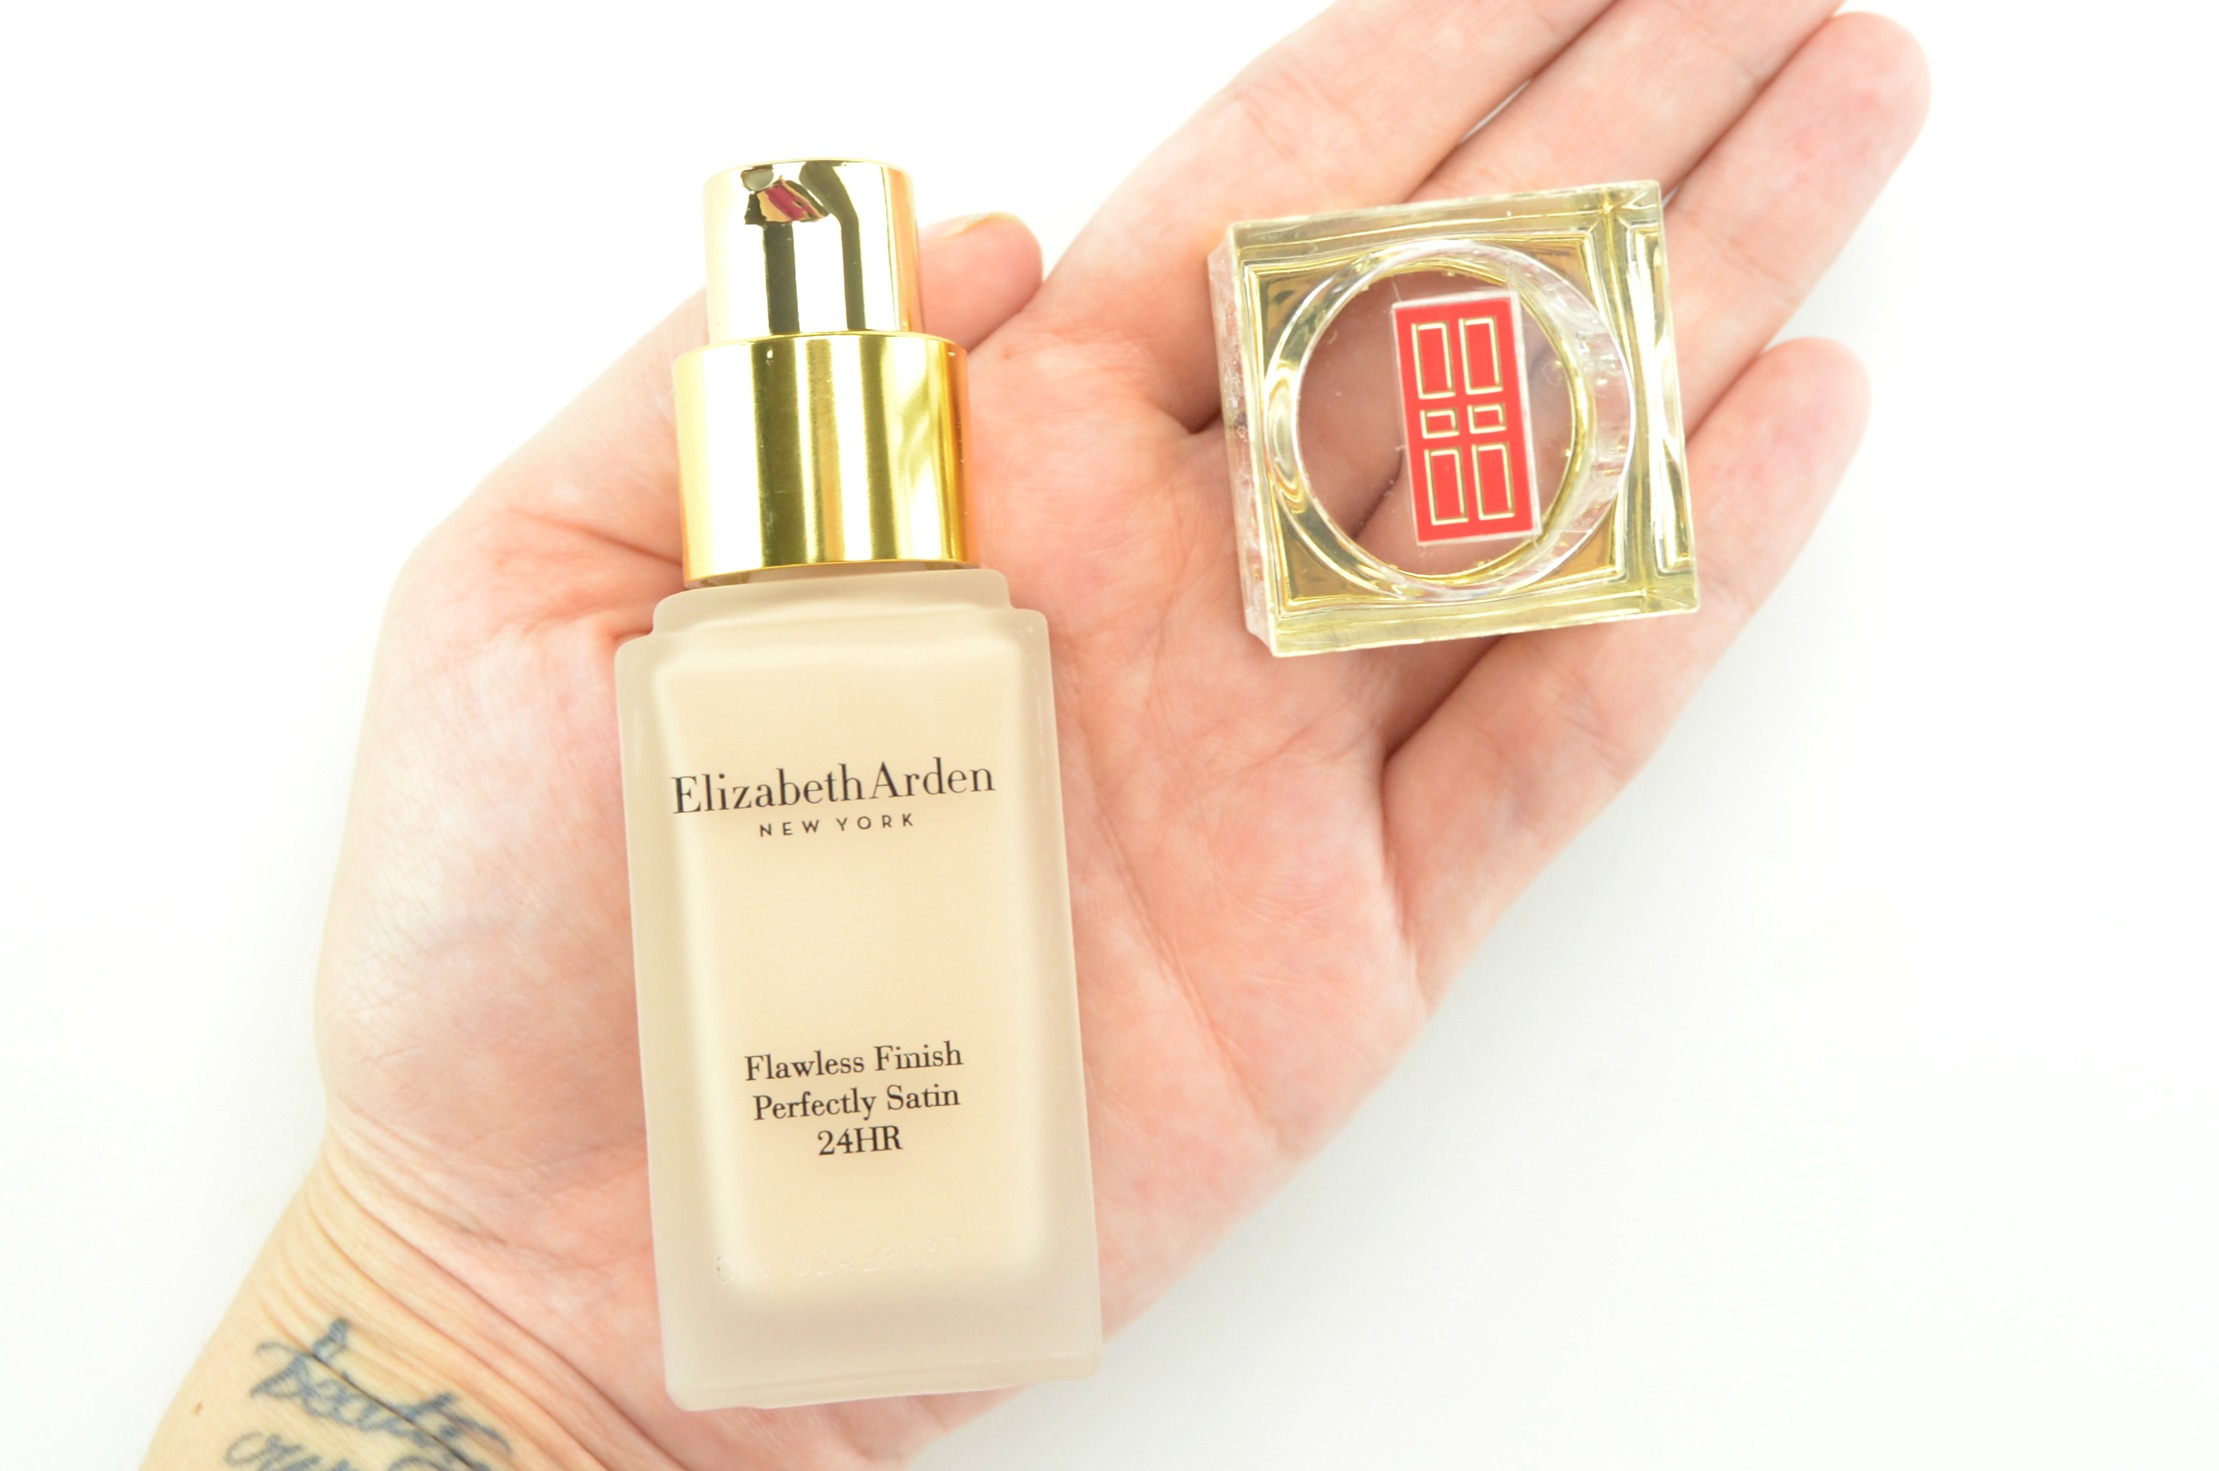 PRODUCT REVIEW: ELIZABETH ARDEN FLAWLESS FINISH PERFECTLY 